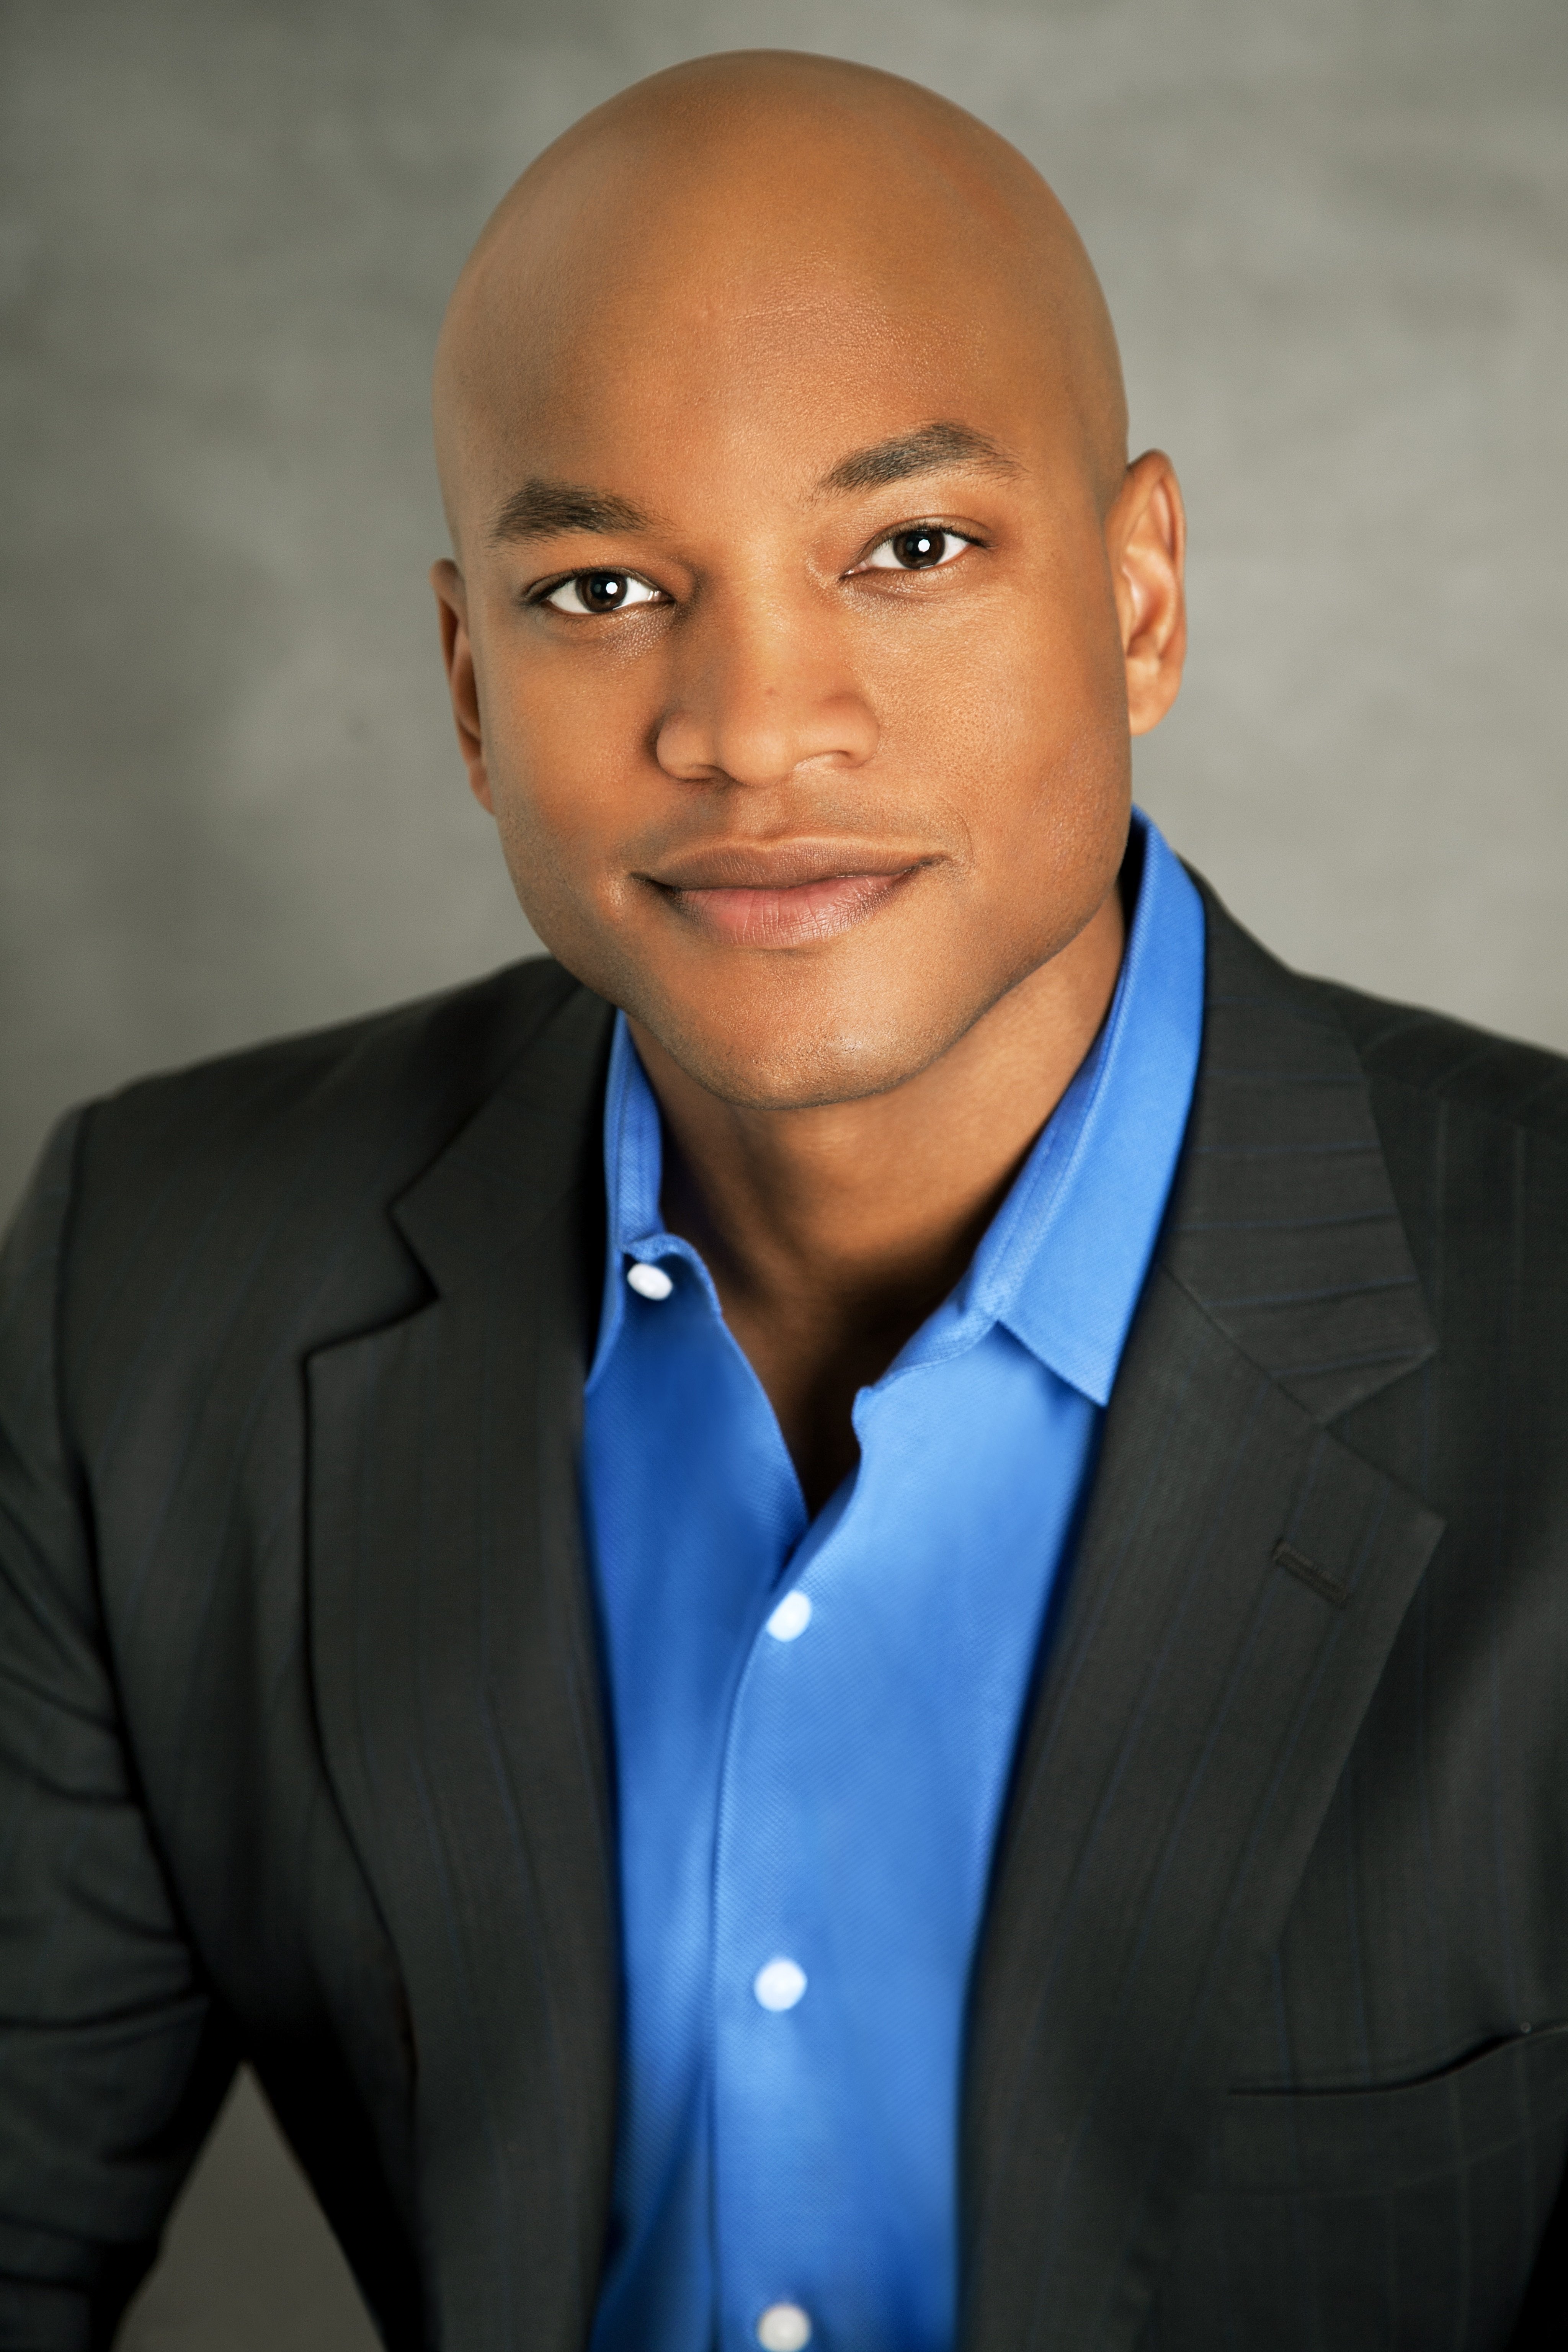 Baltimore Montessori Public Welcomes Honorary Chair WES MOORE to the